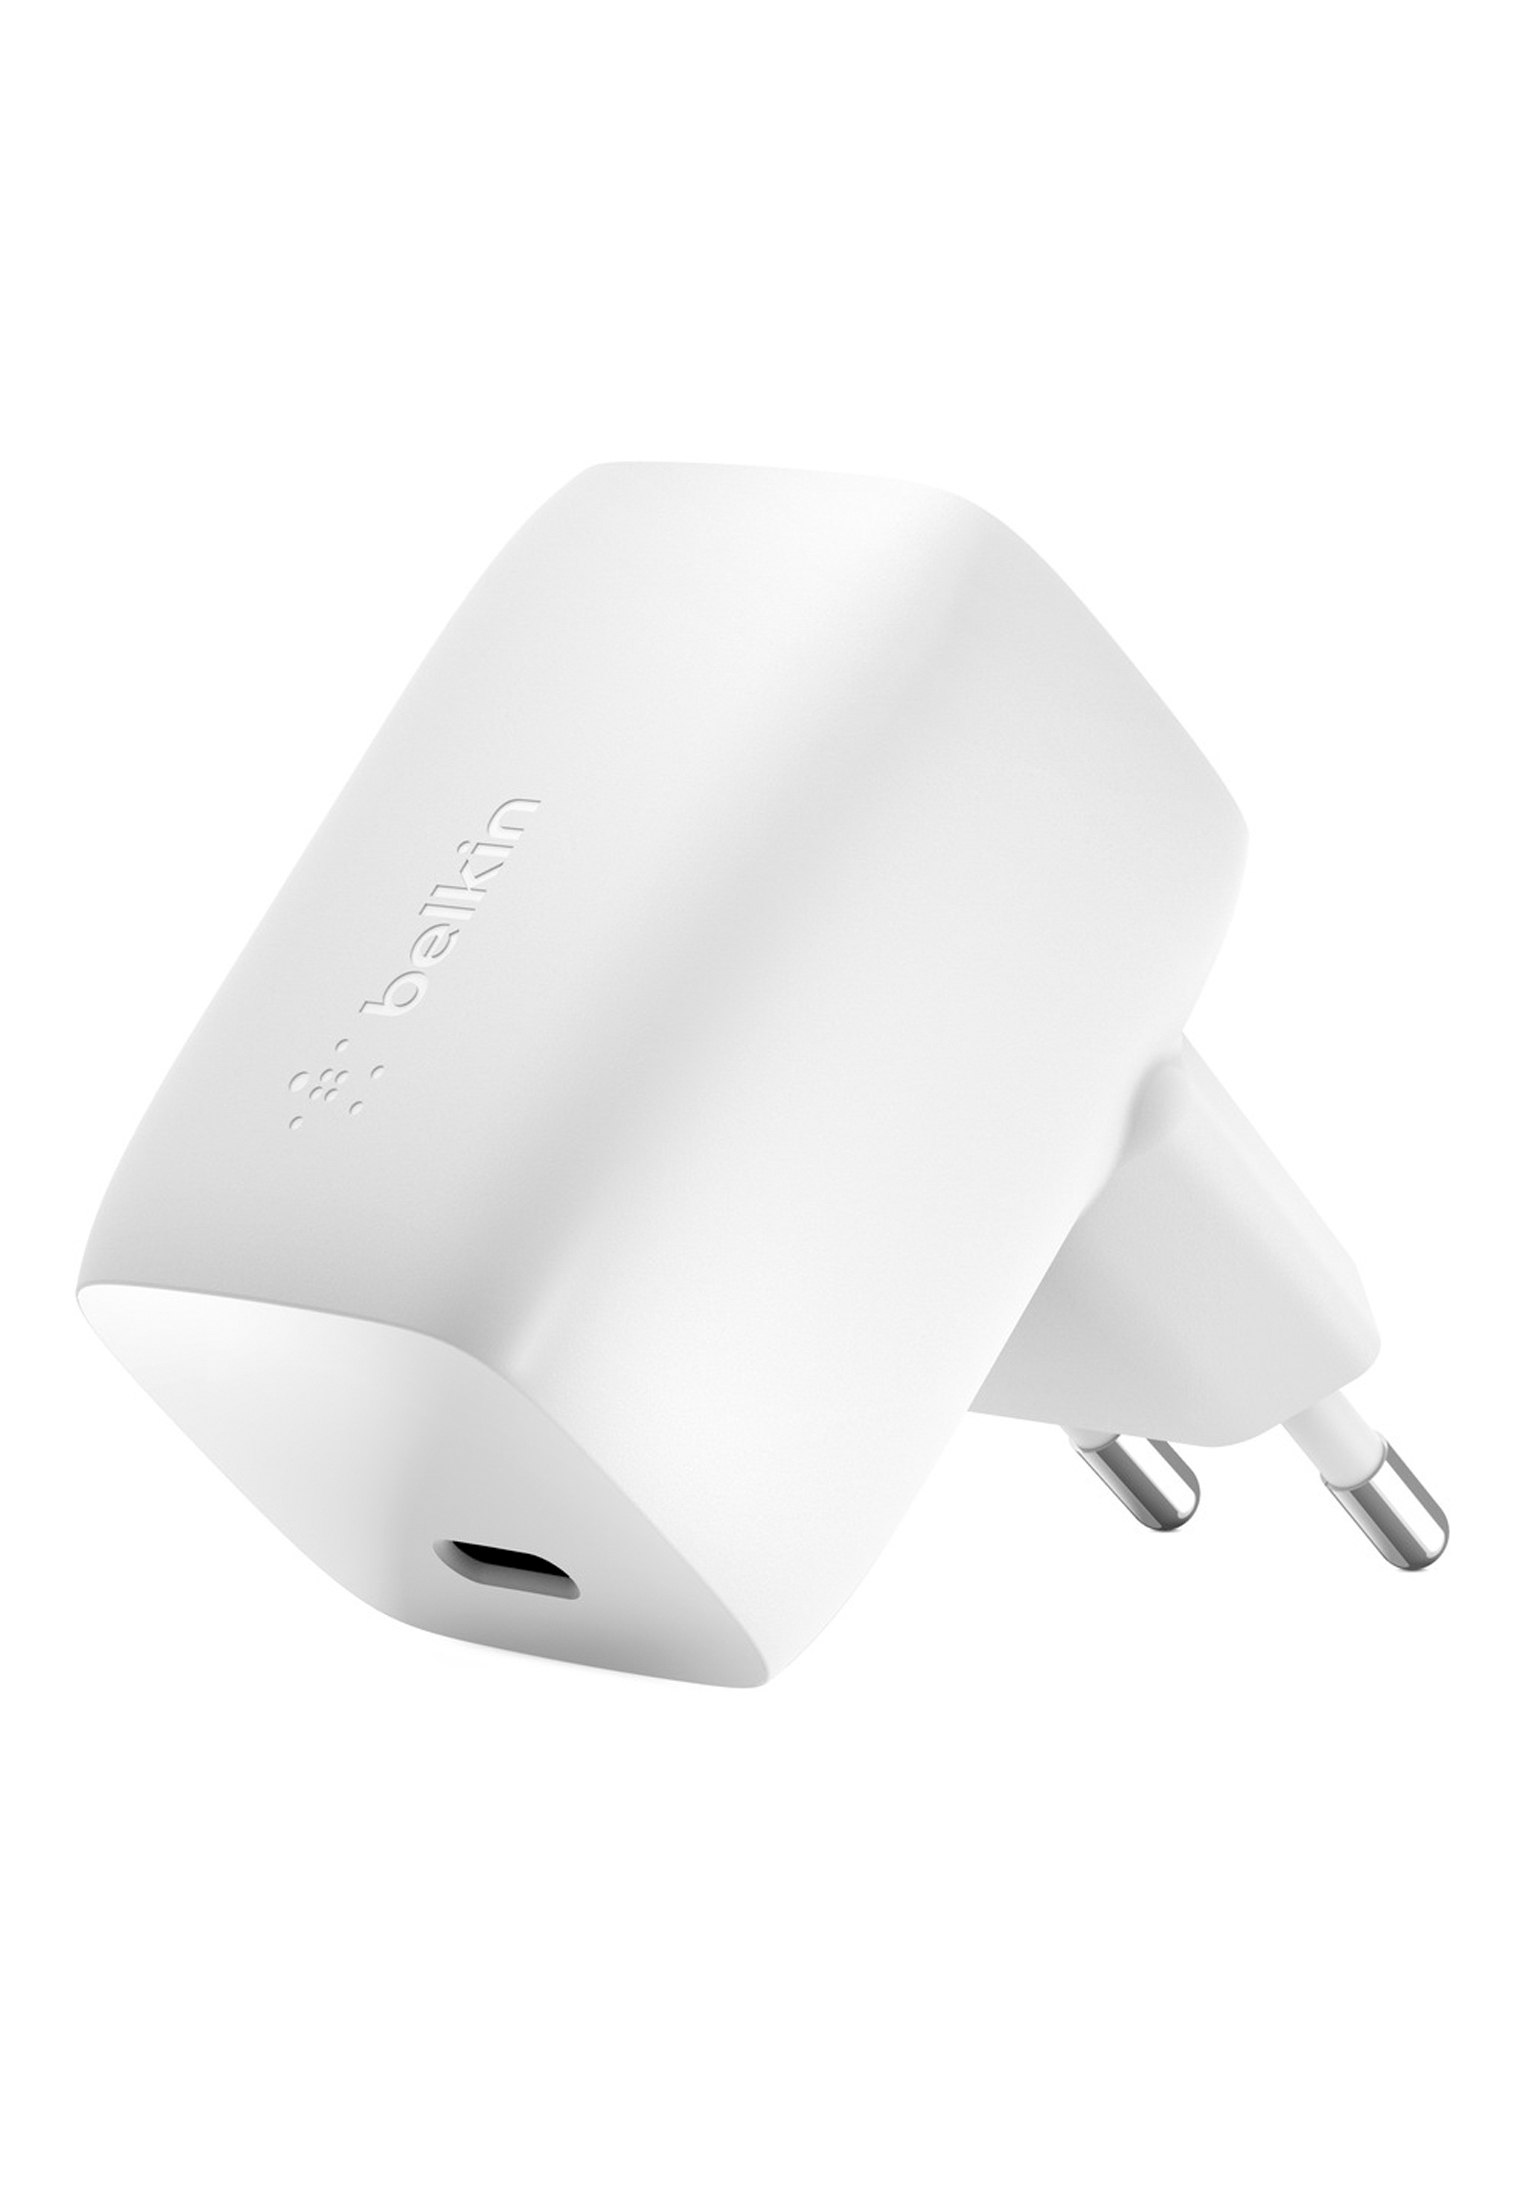 BELKIN weiß BOOST 230 USB-C Apple, Volt, Charger CHARGE™ Samsung,